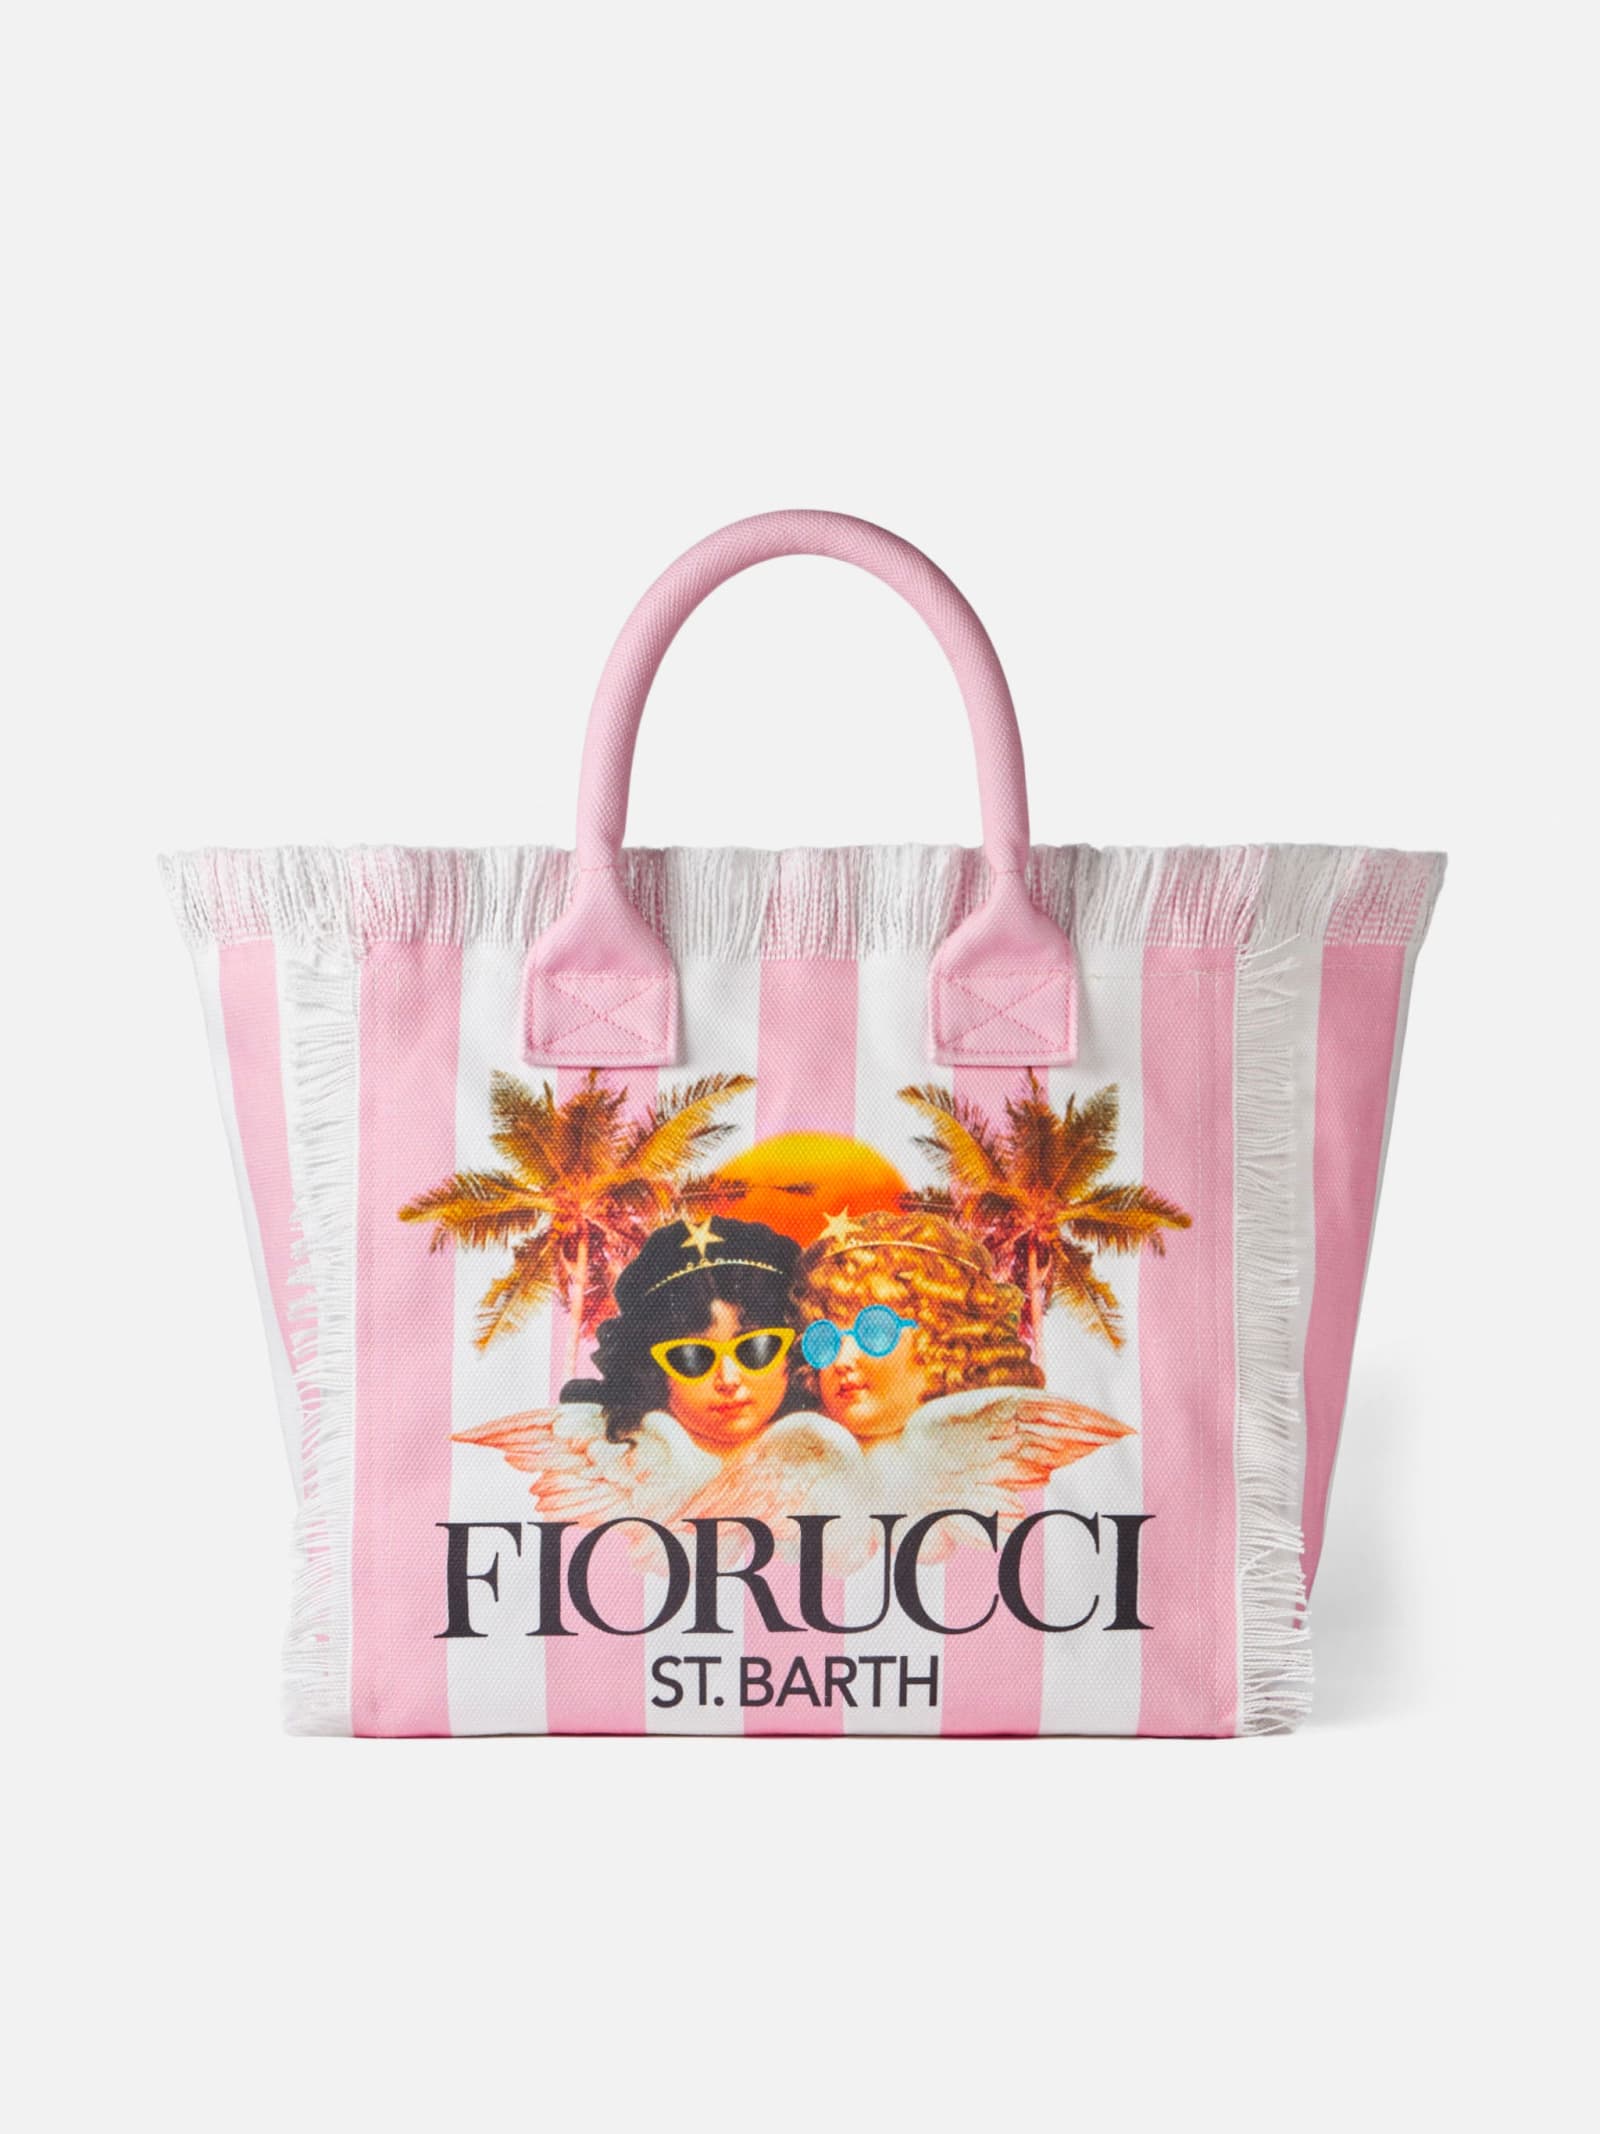 Mc2 Saint Barth Vanity Canvas Shoulder Bag With White And Pink Stripes And Fiorucci Angels Print Fiorucci Special Ed